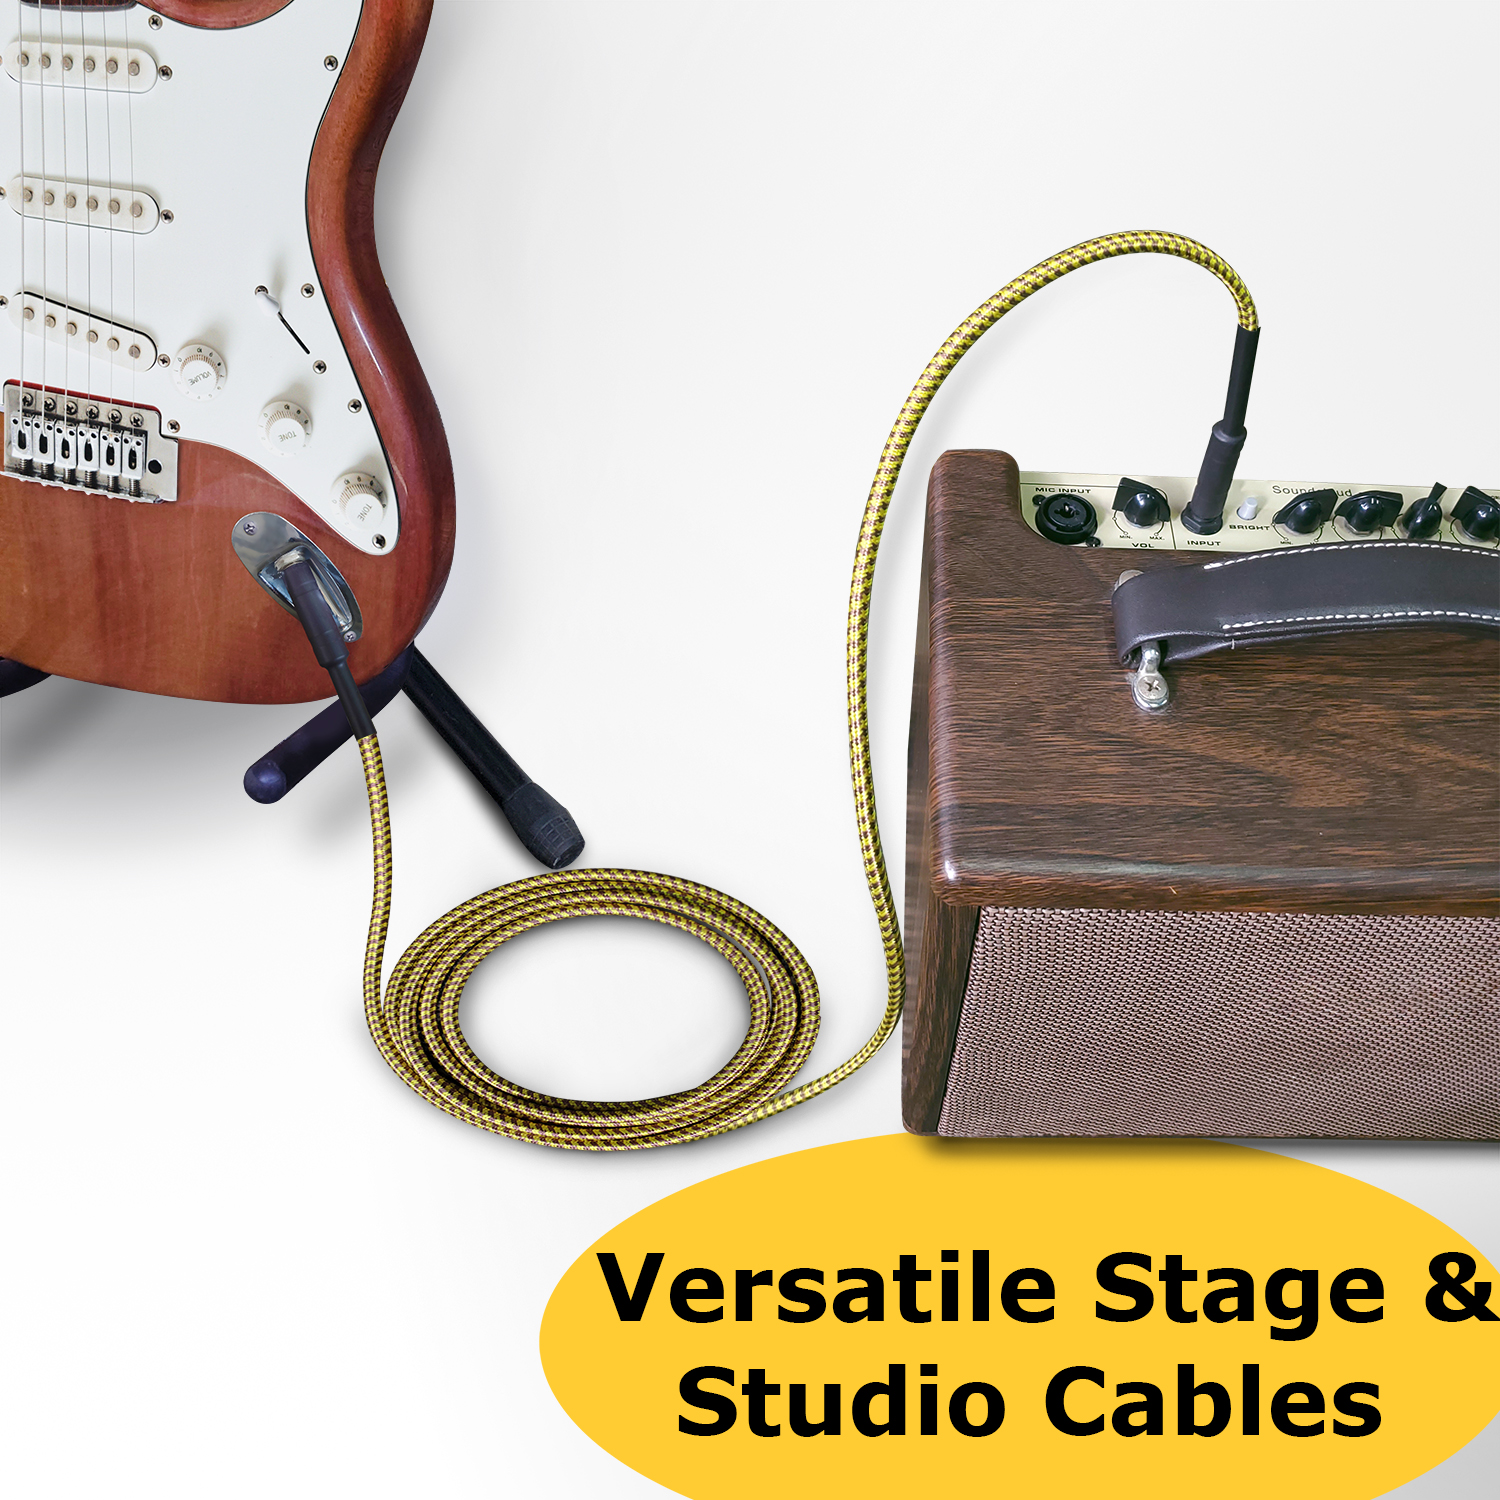 Guitar Cables: 8 key issues to pay attention to